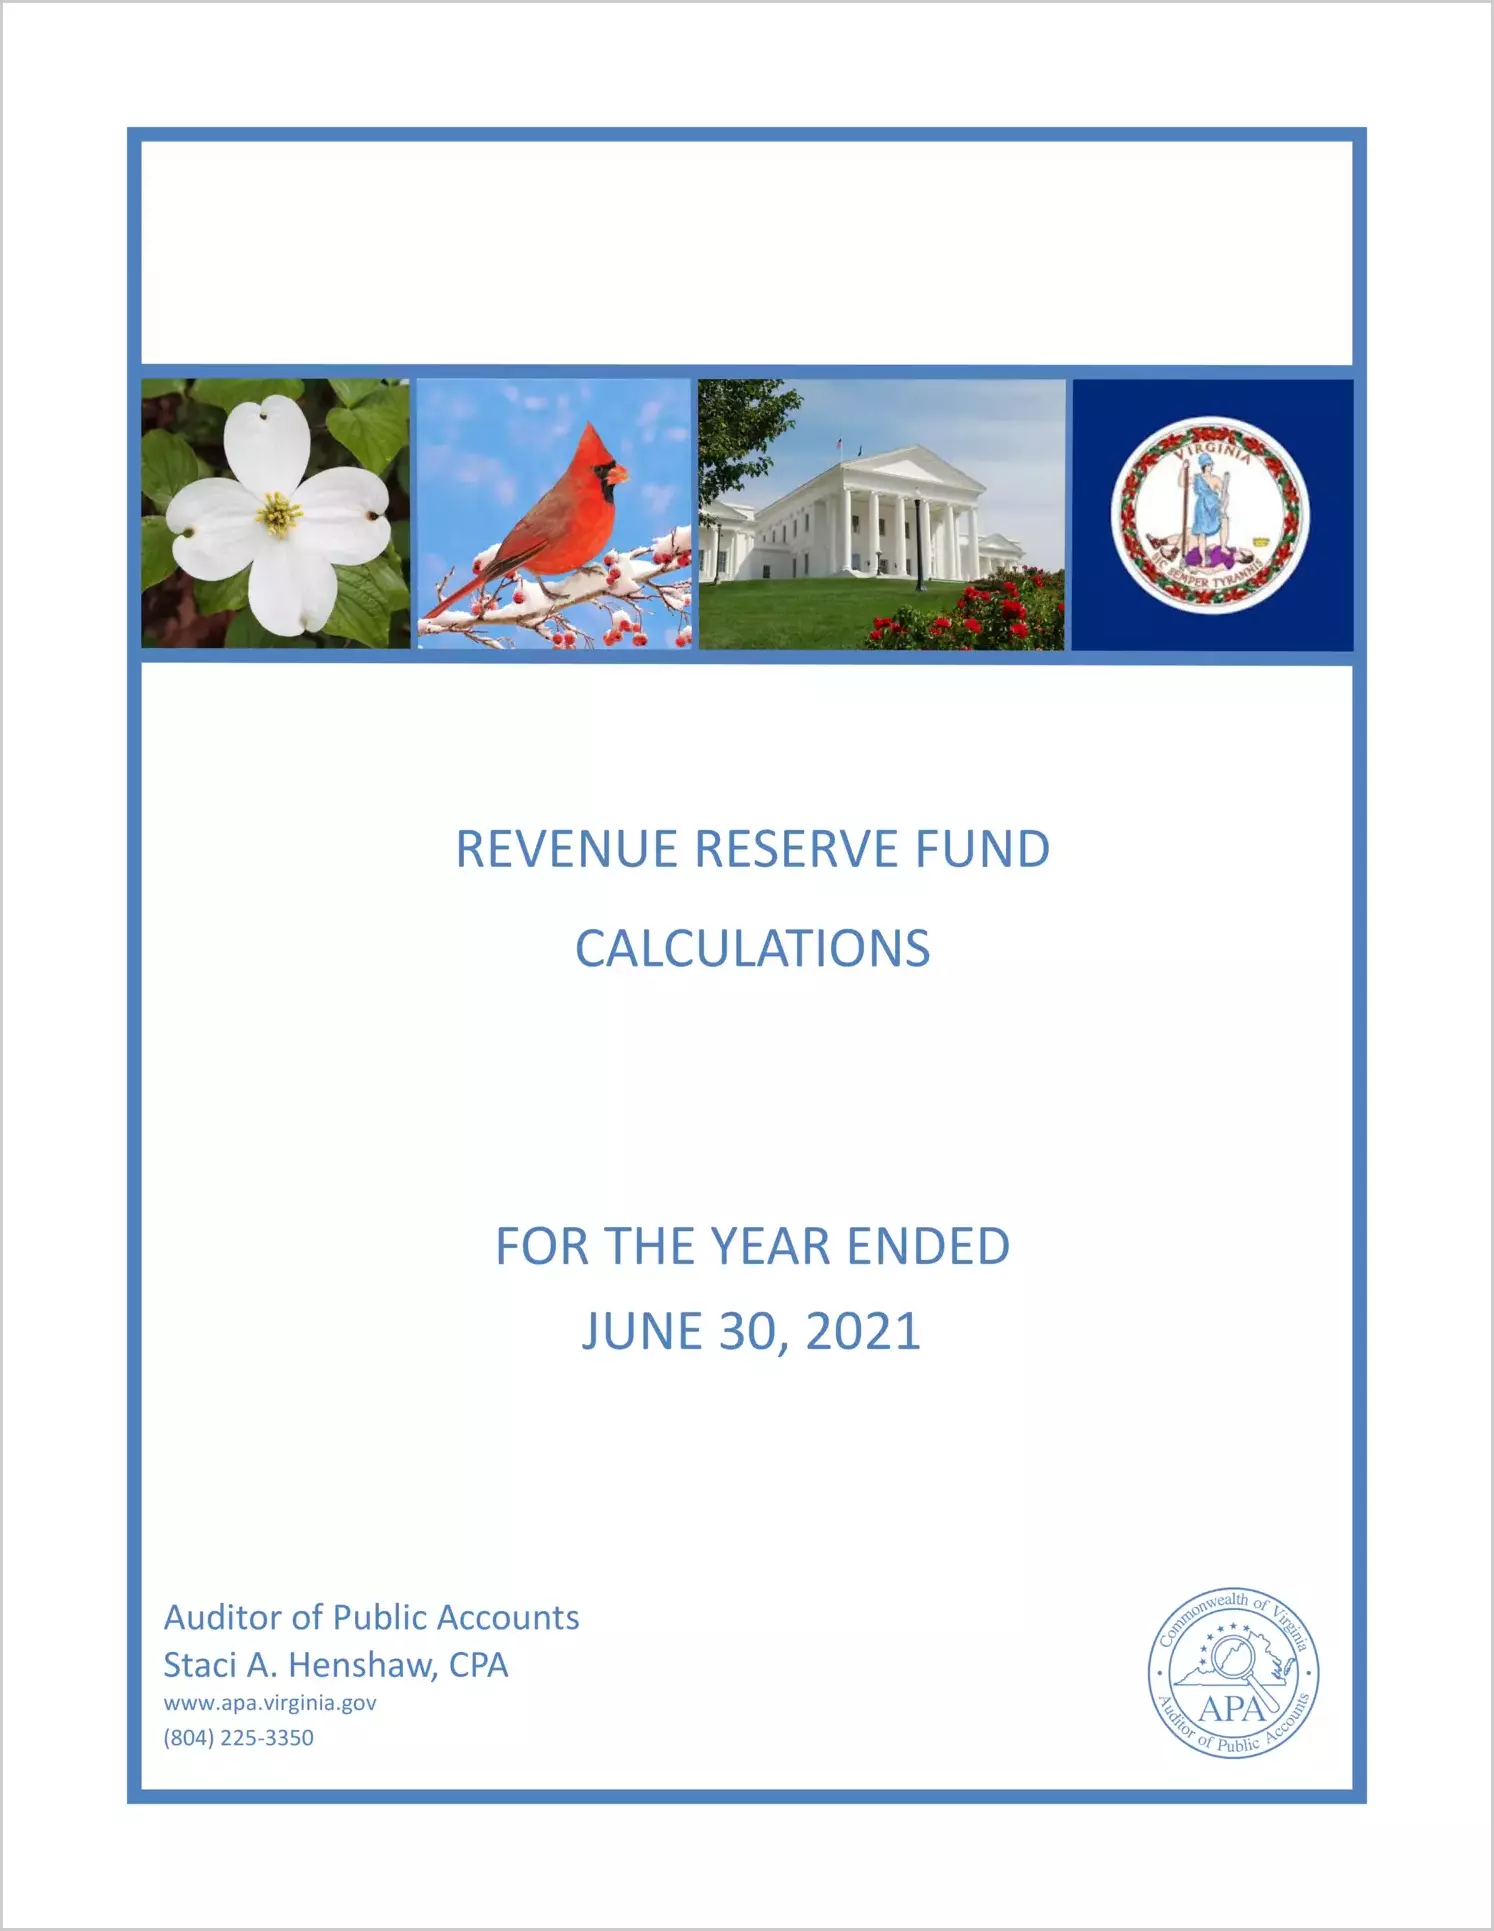 Revenue Reserve Fund Calculations for the year ended June 30, 2021